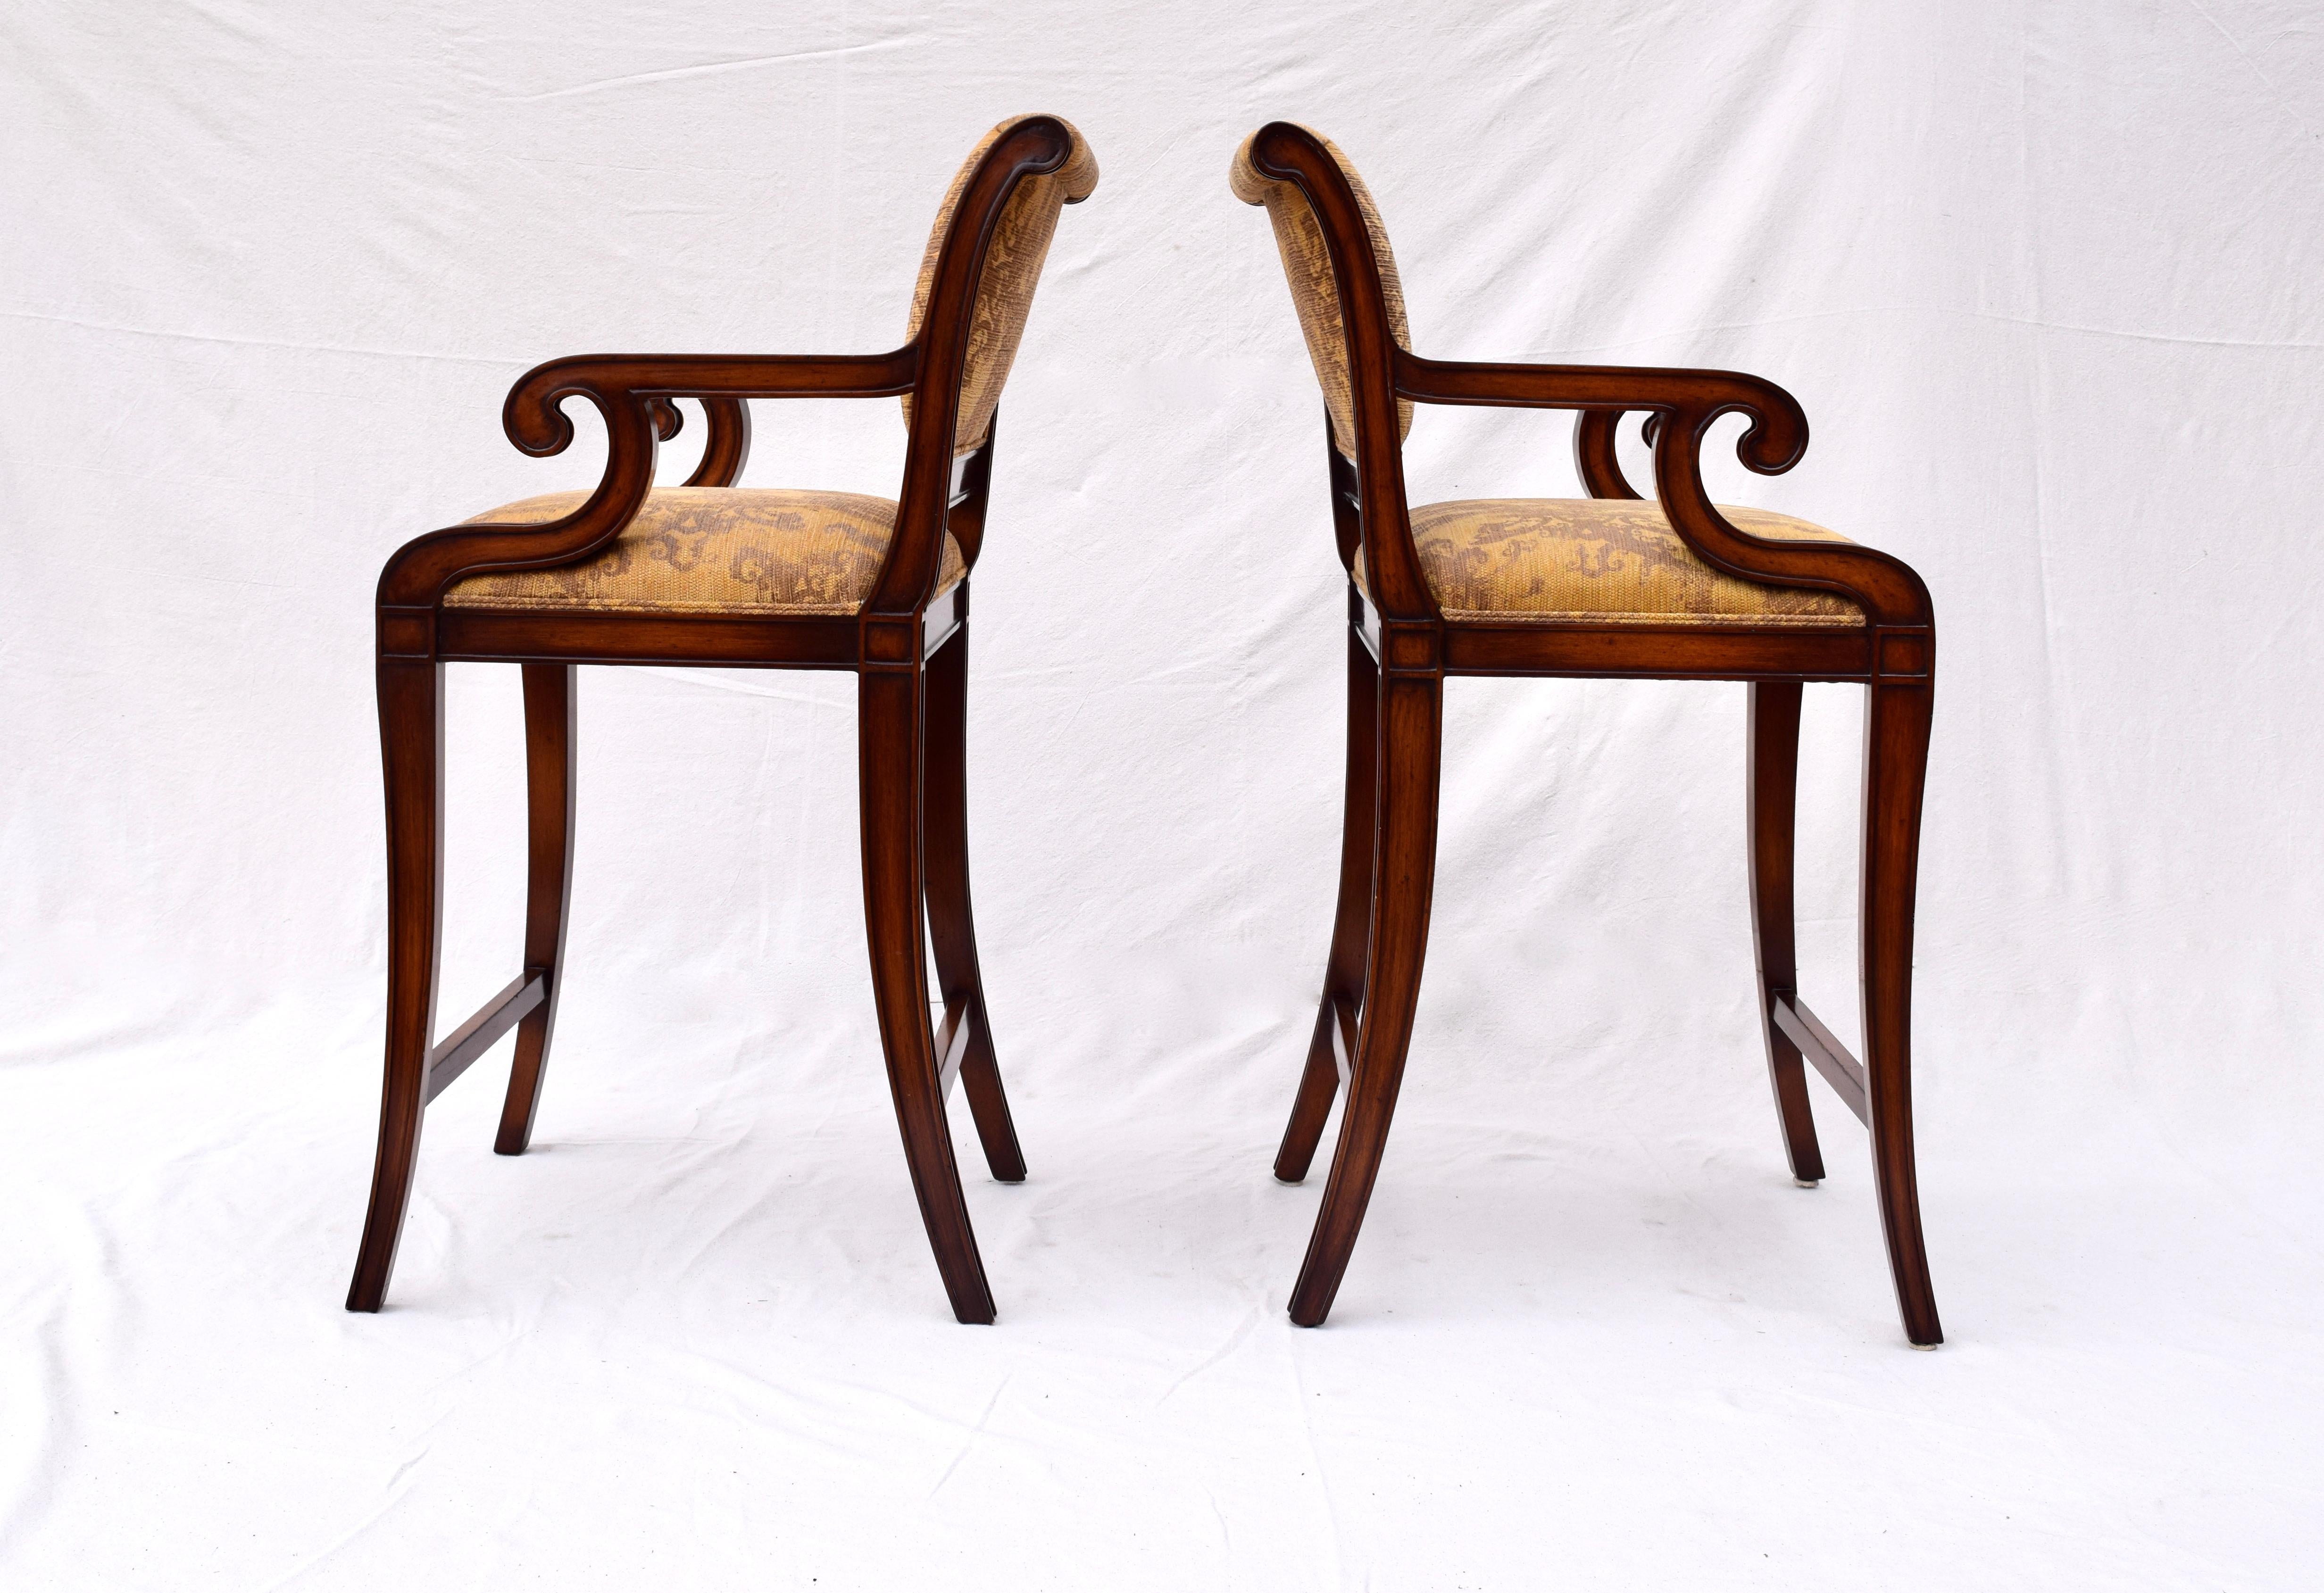 Nancy Corzine Classic Regency Bar Stool Chairs, Pair In Excellent Condition For Sale In Southampton, NJ